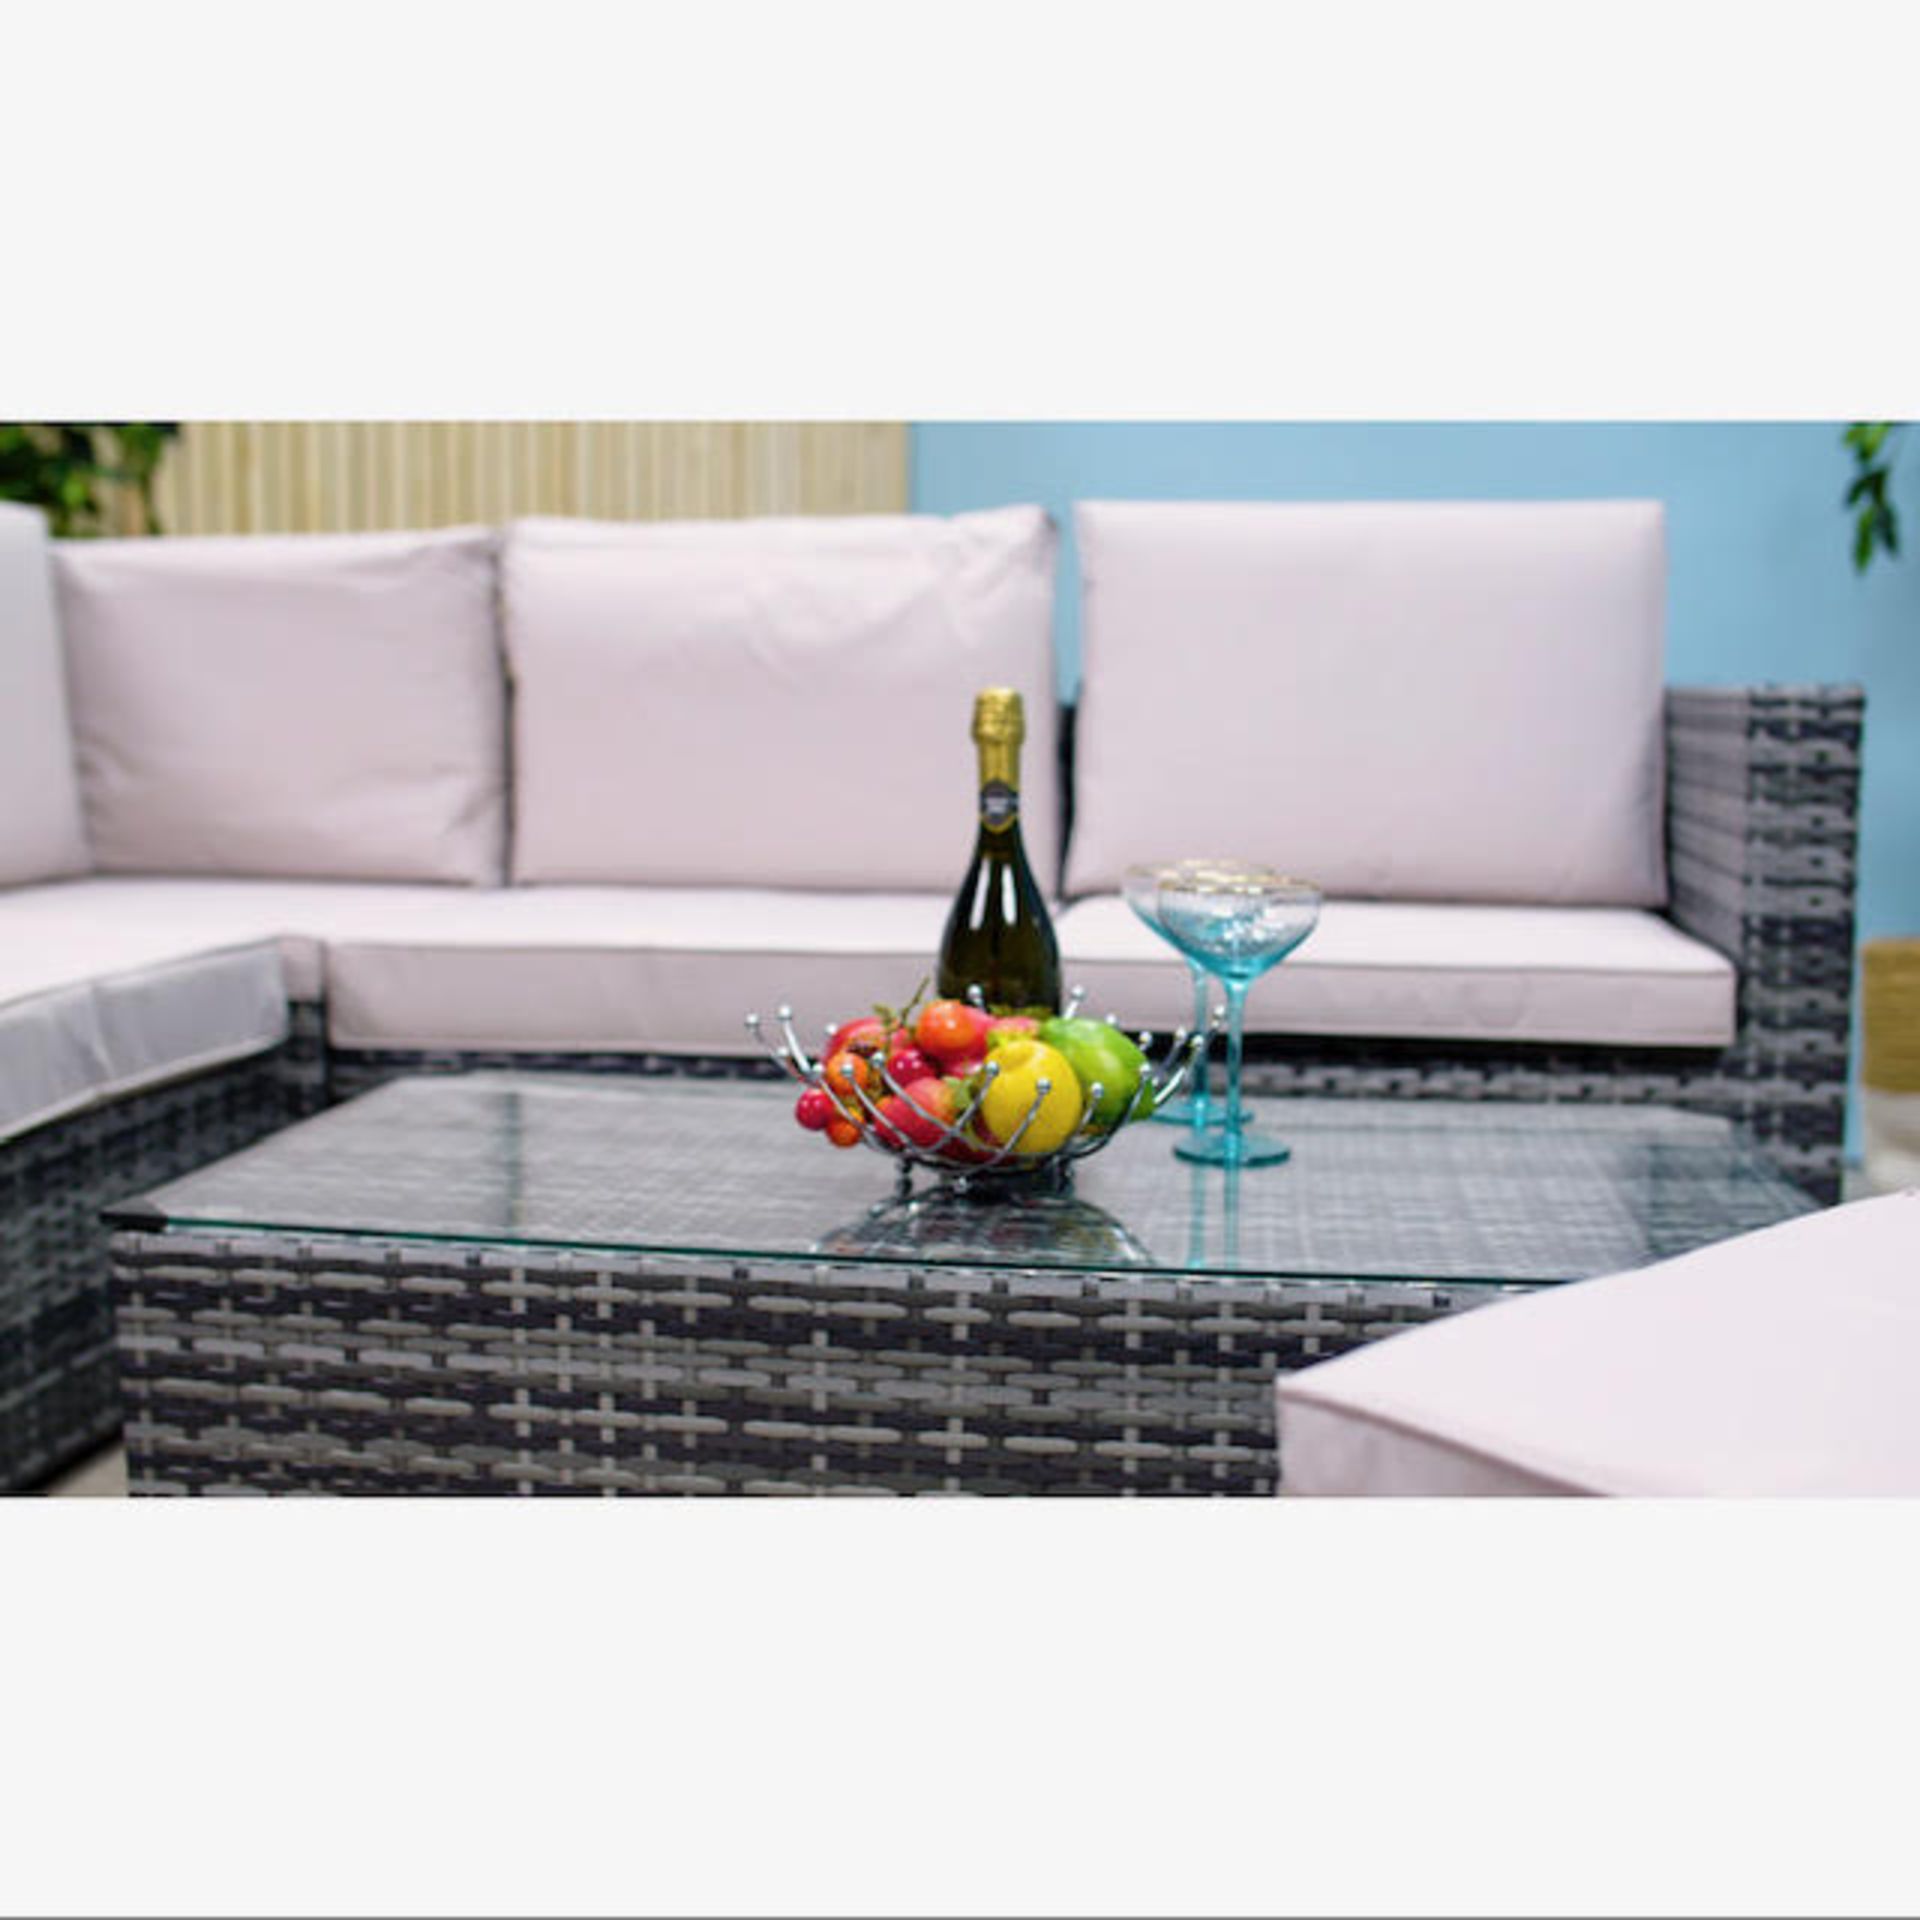 TRADE LOT 5 X BRAND NEW LINEA 7 PIECE LUXURY RATTAN SETS RRP £1499 EACH. PERFECT FOR THOSE SUMMER - Image 4 of 6